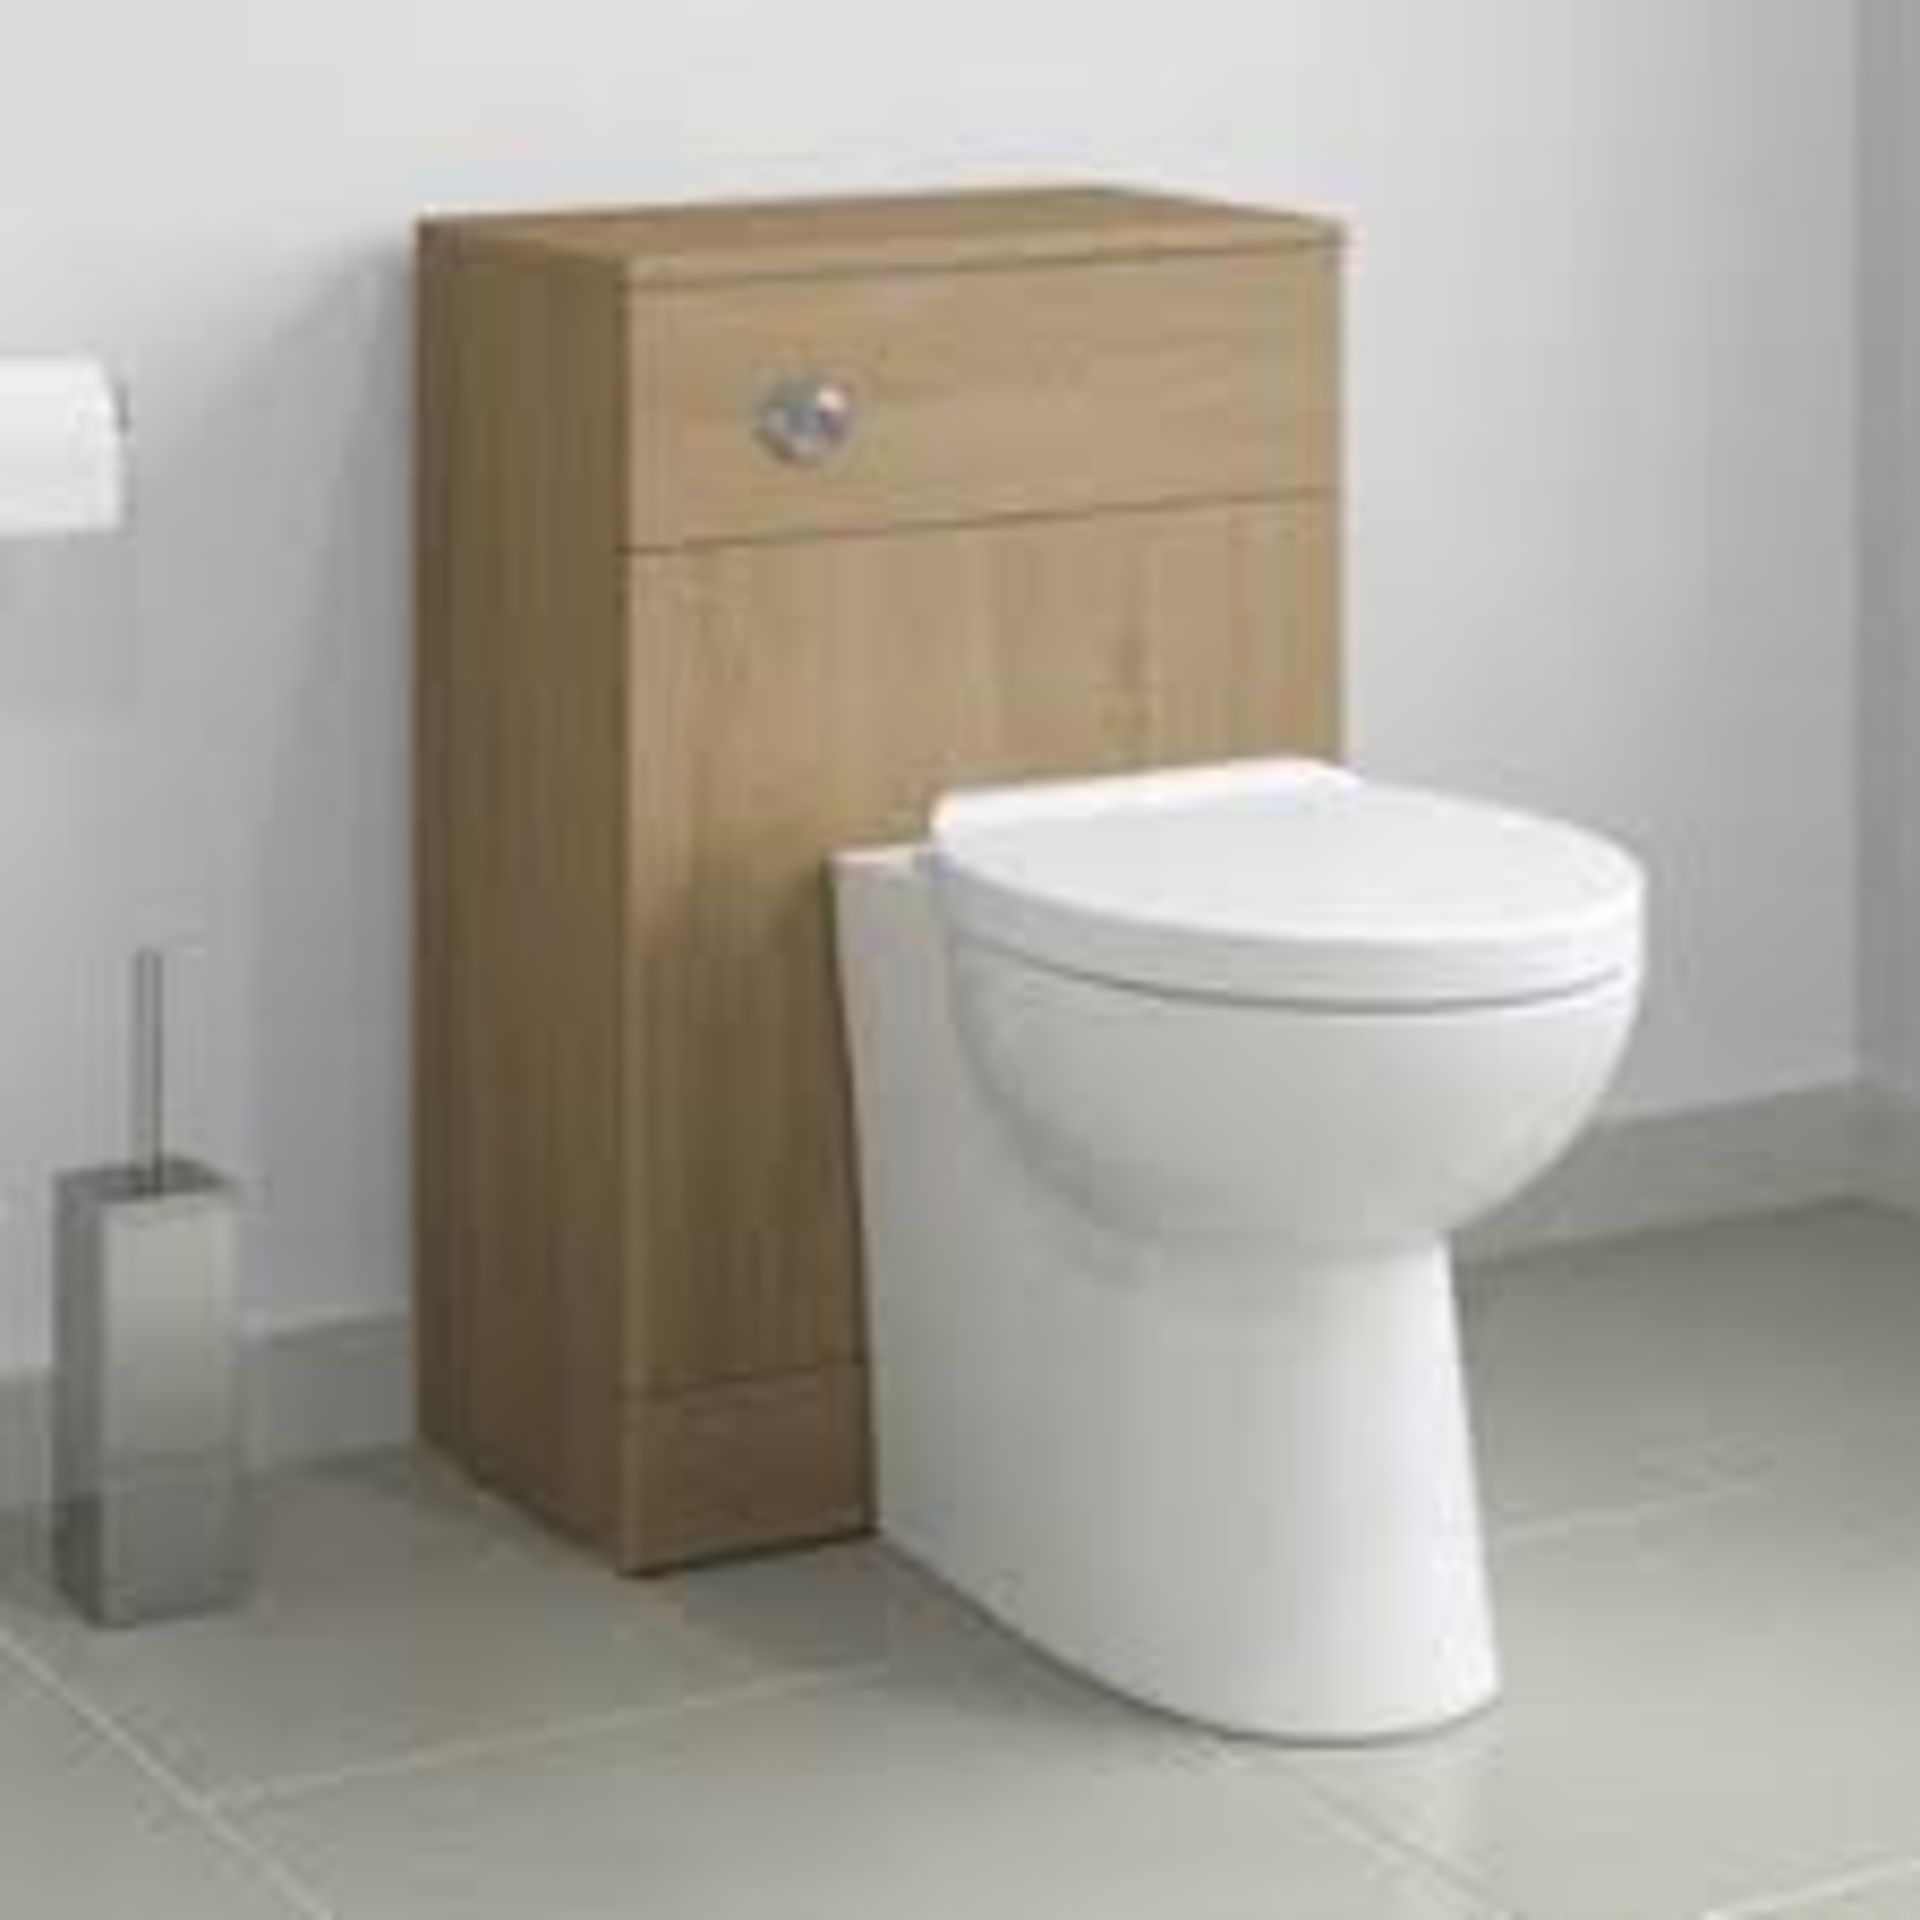 Quartz Back to Wall Toilet.Stylish design Made from White Vitreous China Finished in a high glo...